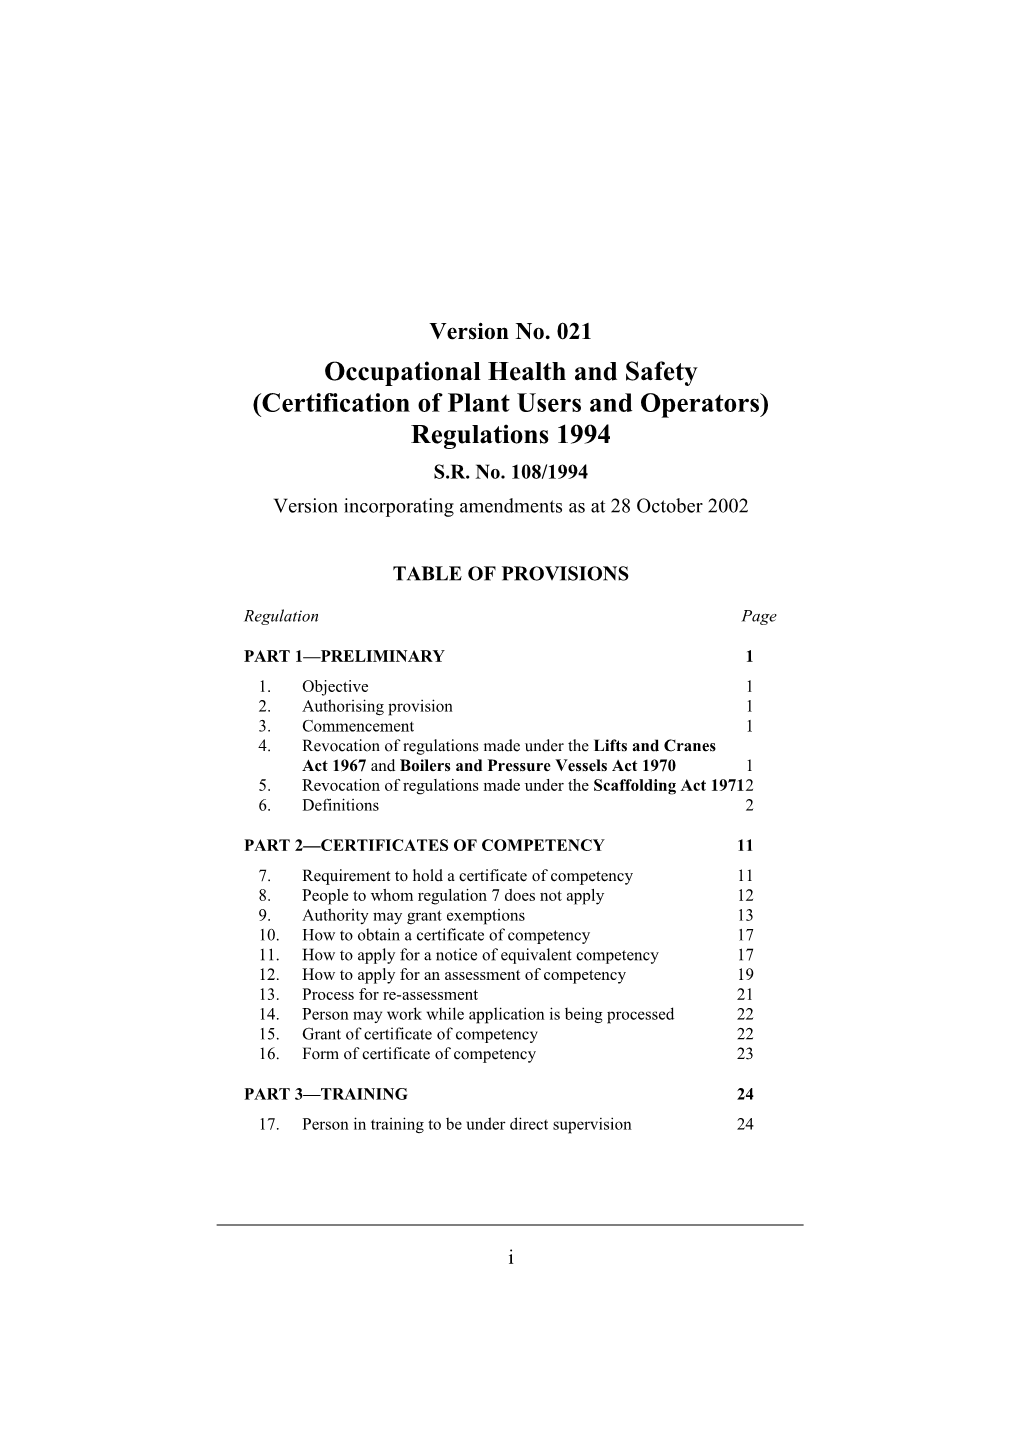 Occupational Health and Safety (Certification of Plant Users and Operators) Regulations 1994